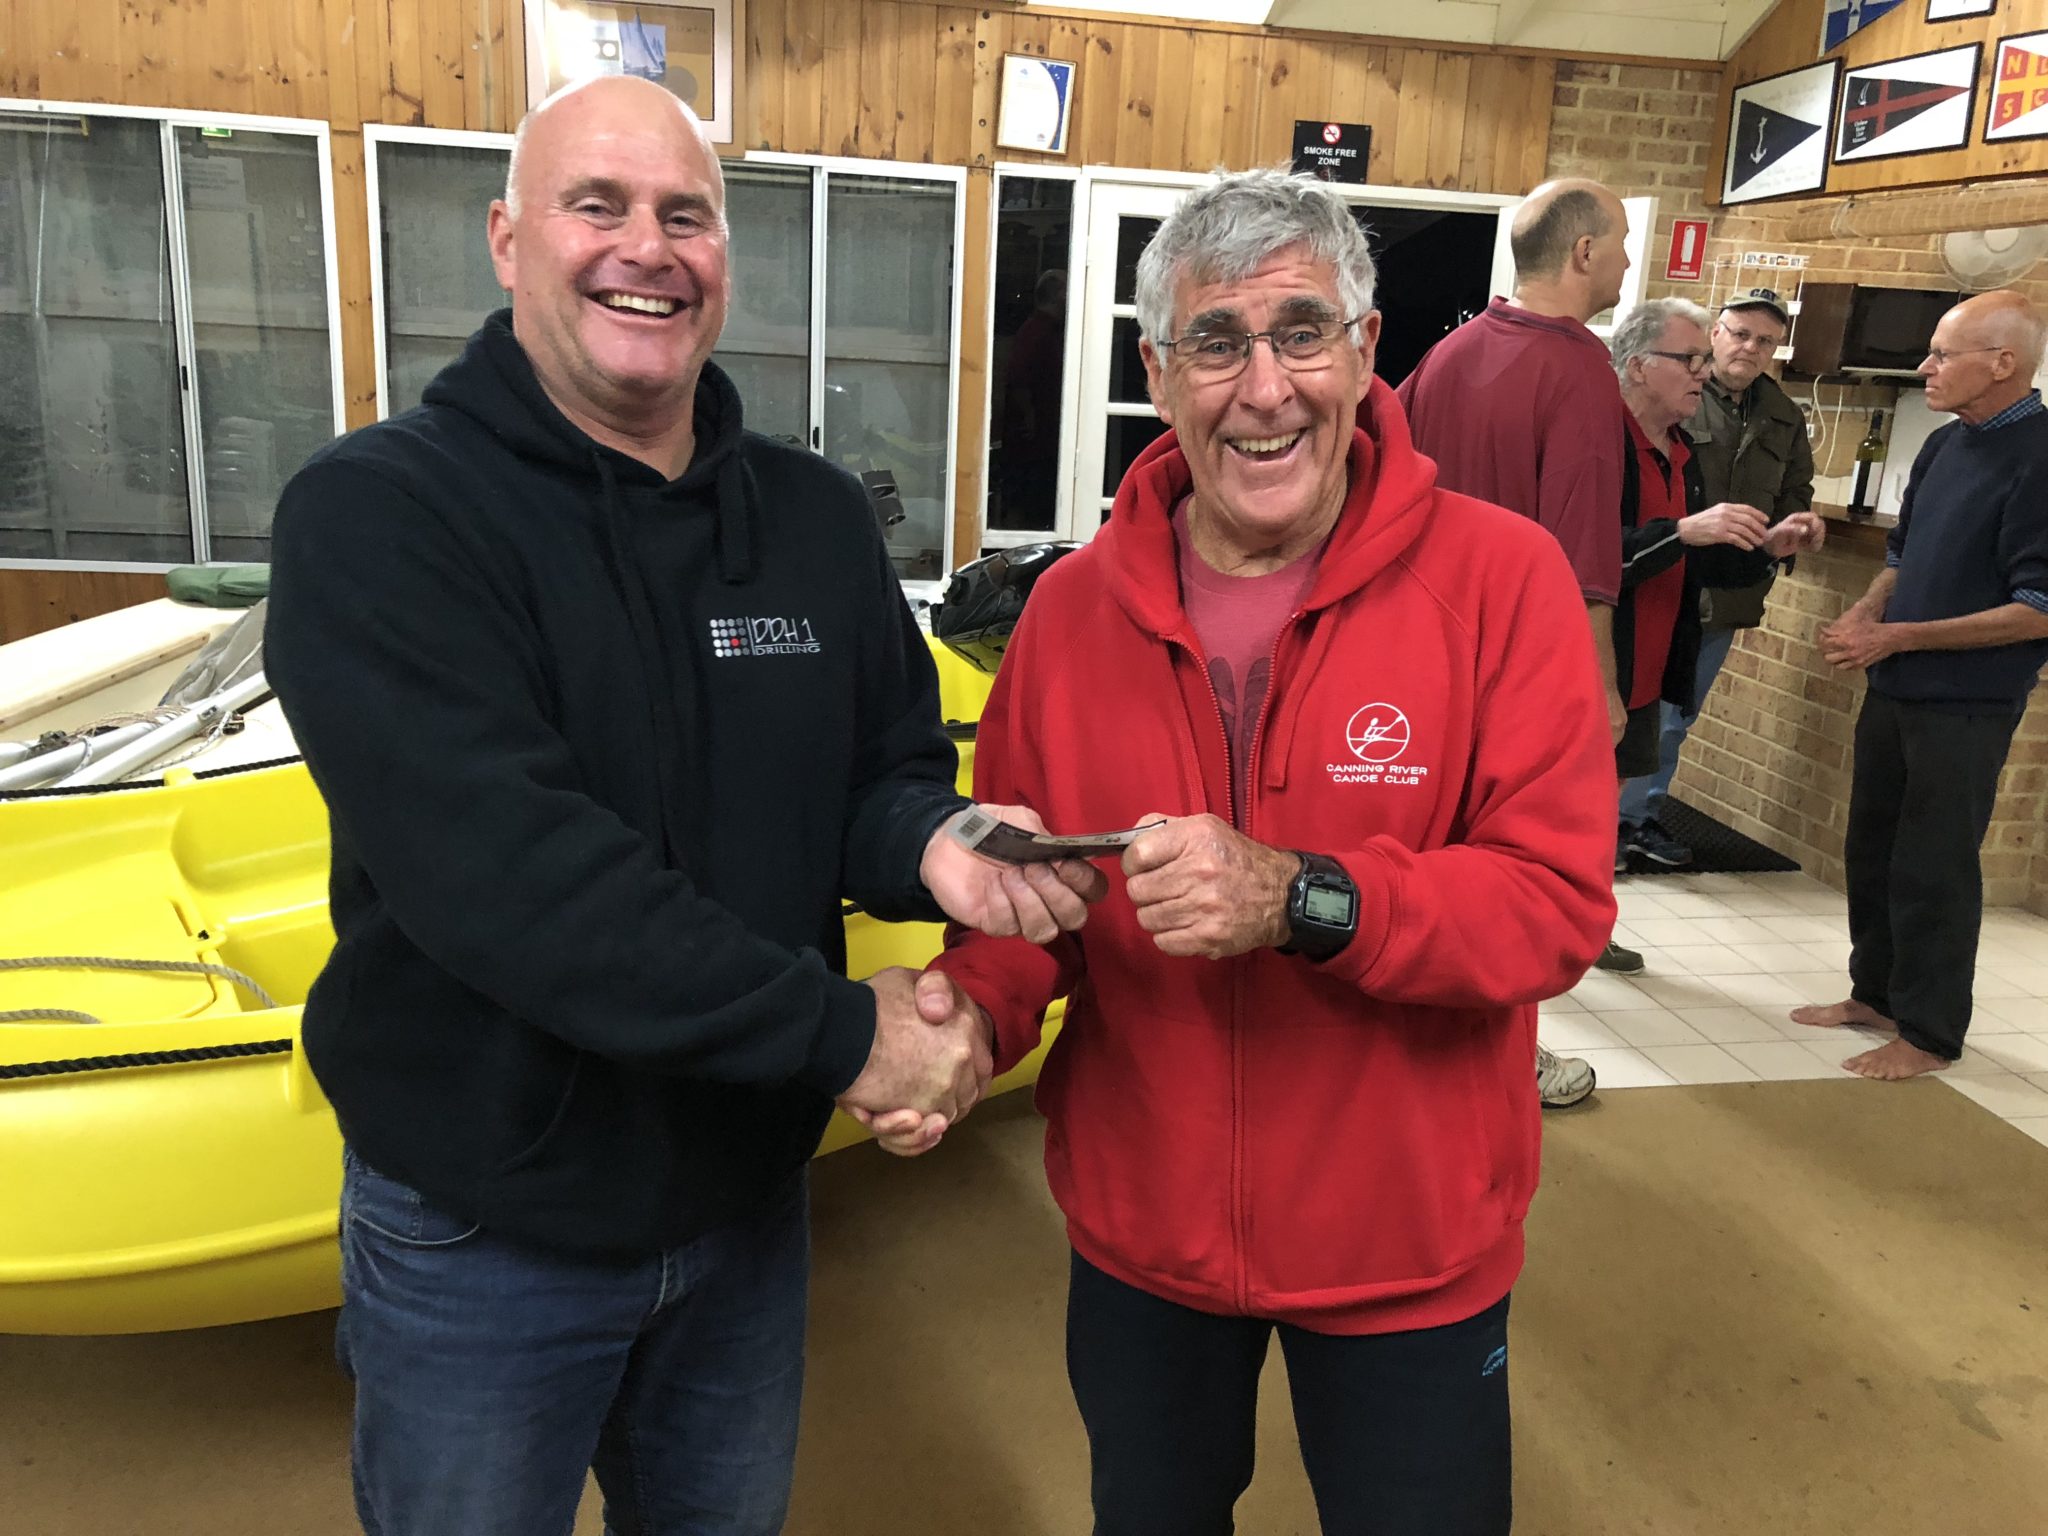 Tues 18th September 2018 : Tonight’s photo shows club member Peter Burge  presenting Joe Wilson with a movie voucher